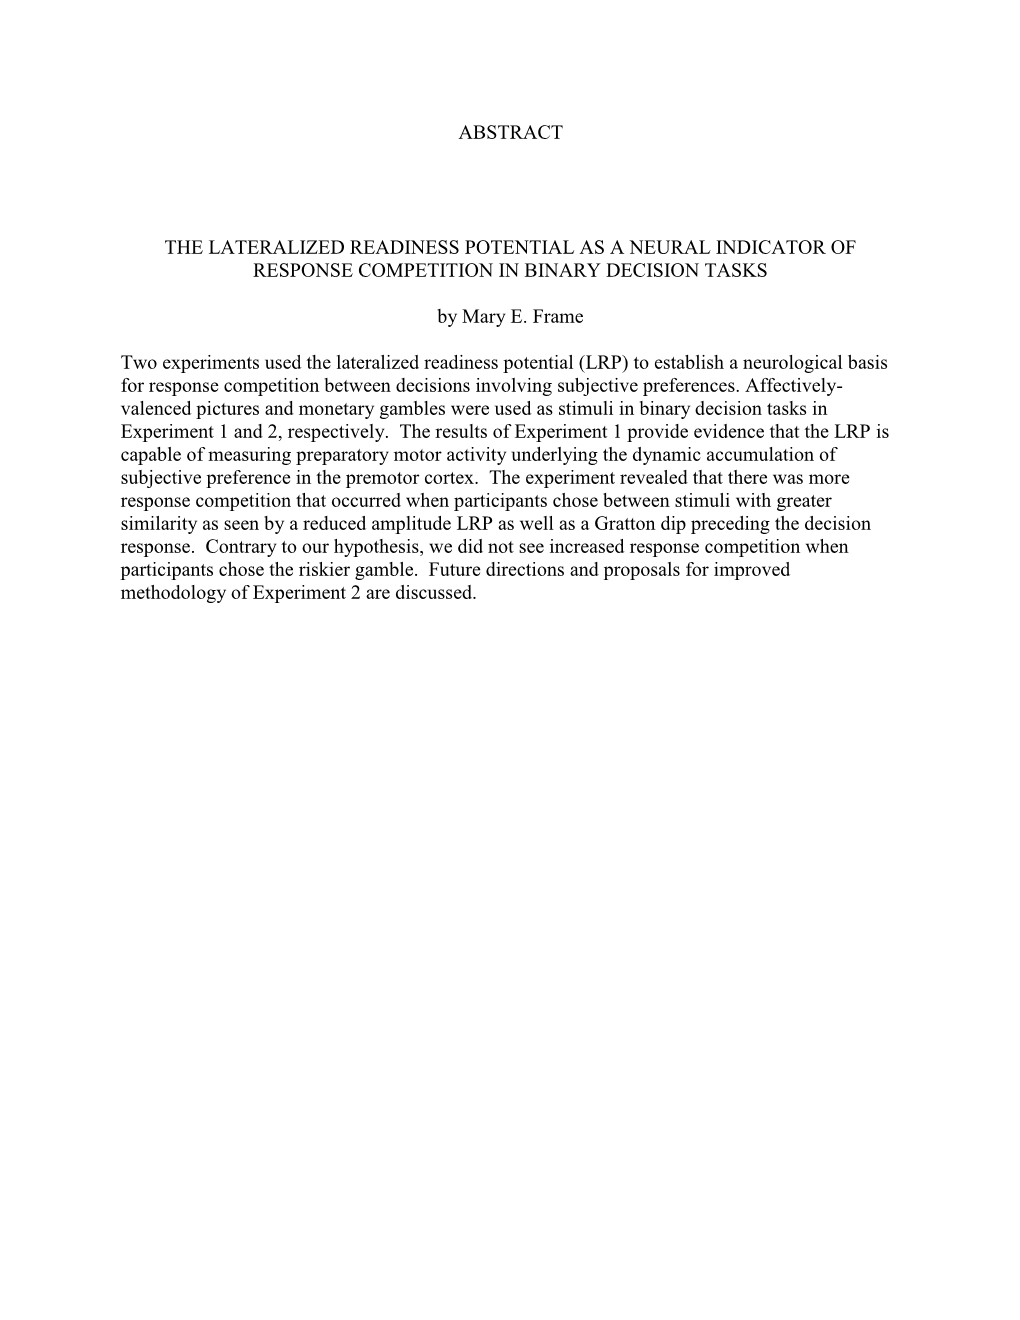 ABSTRACT the LATERALIZED READINESS POTENTIAL AS a NEURAL INDICATOR of RESPONSE COMPETITION in BINARY DECISION TASKS by Mary E. F